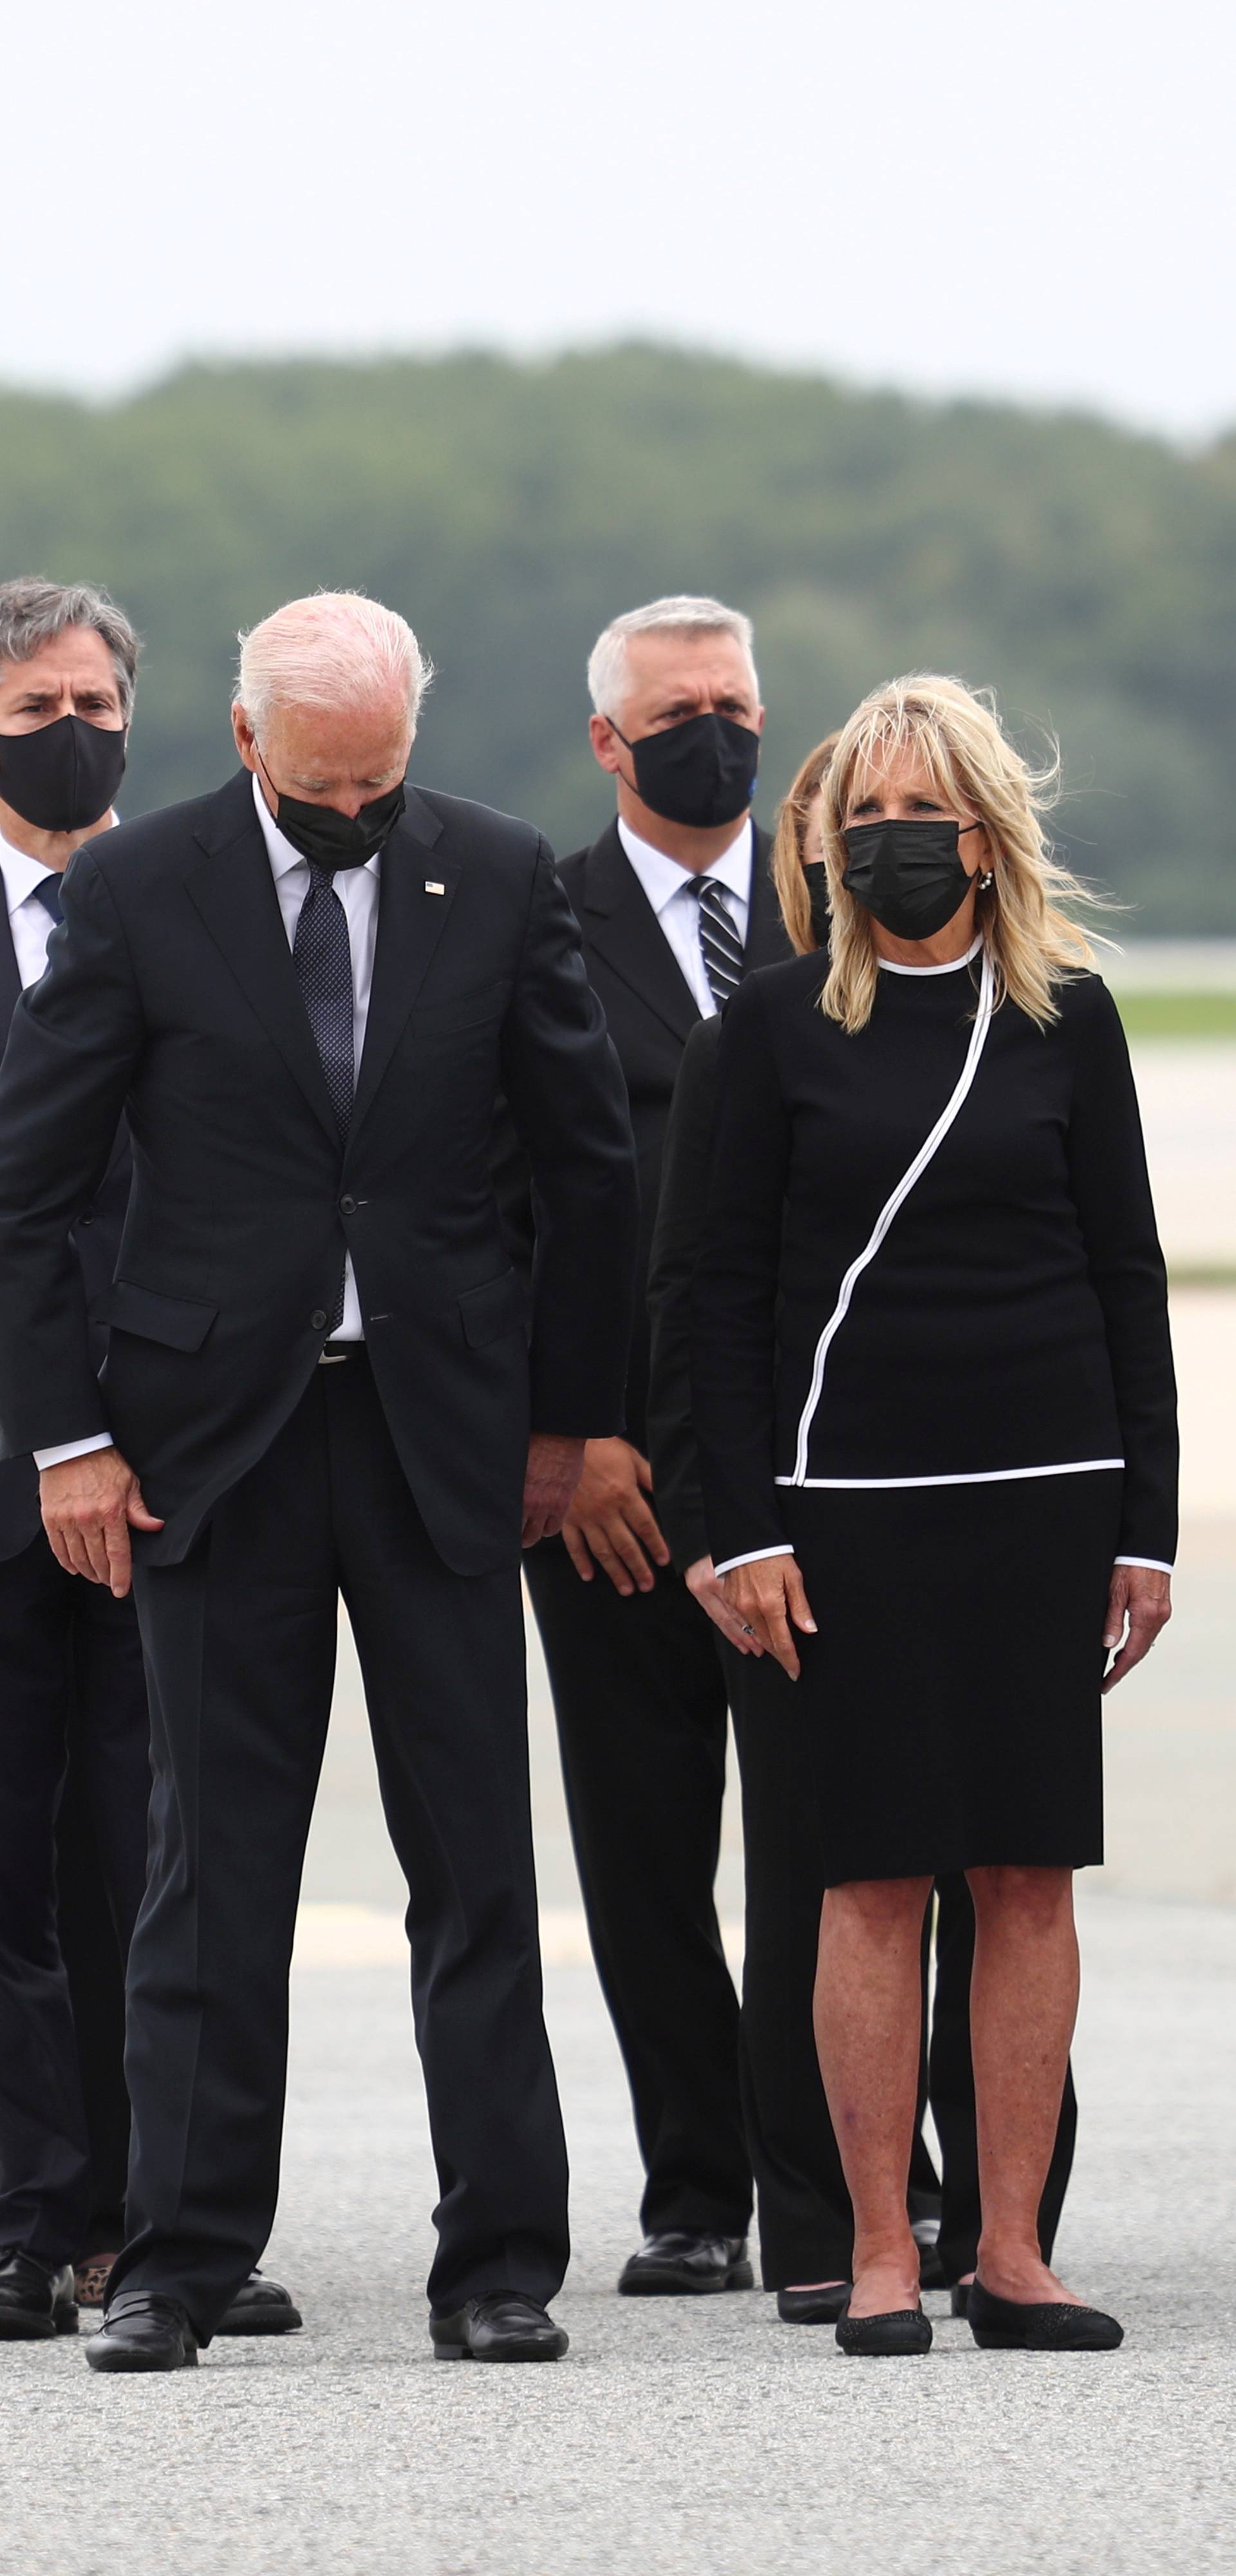 U.S. President Joe Biden attends the dignified transfer of the remains of U.S. Military service members who were killed by a suicide bombing at the Hamid Karzai International Airport